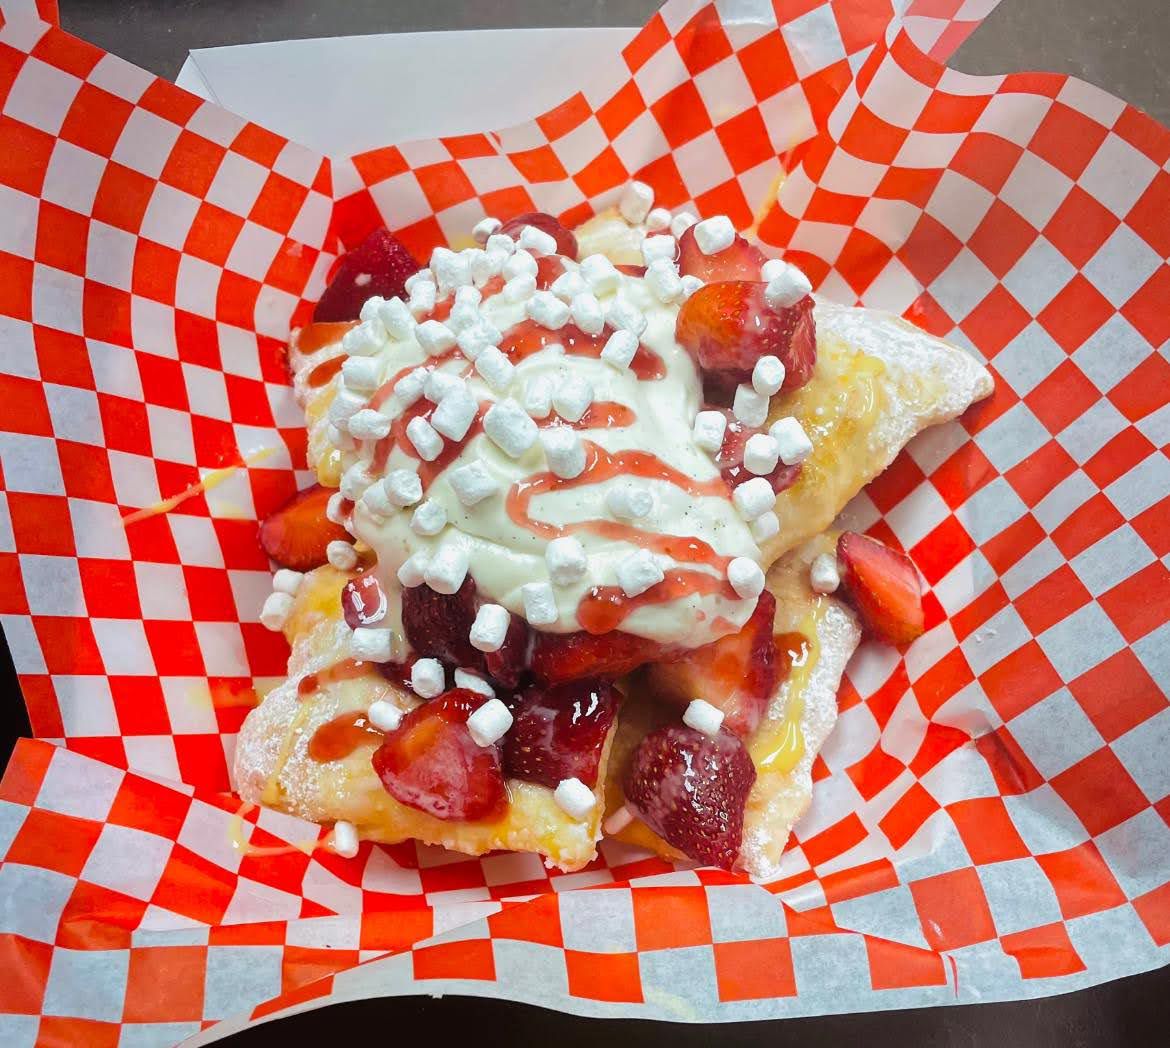 A trio of sopapillas sit in a cardboard boat on top of red-checked paper. They’re covered with strawberries, creme, and tiny dehydrated marshmallows.